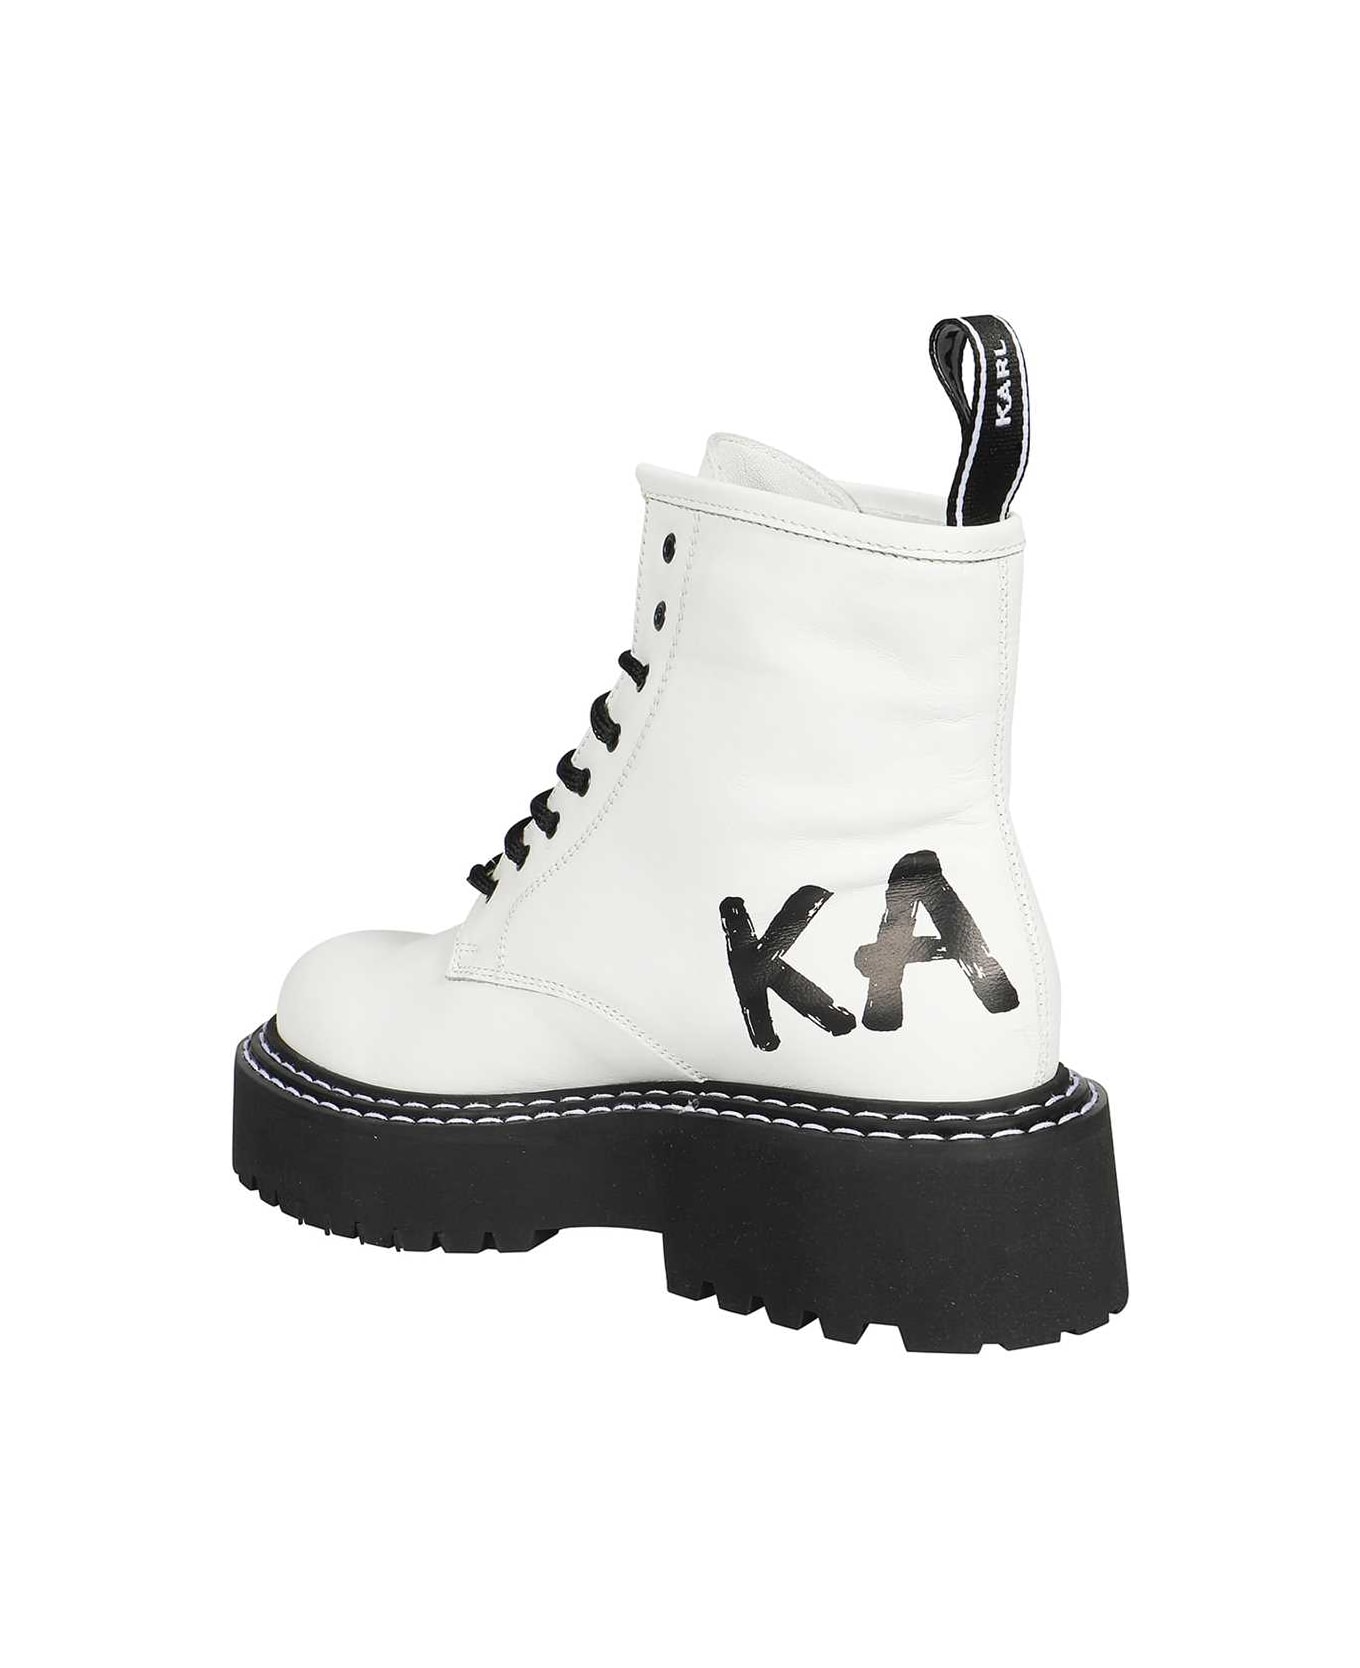 Karl Lagerfeld Lace-up Ankle Boots - White ブーツ